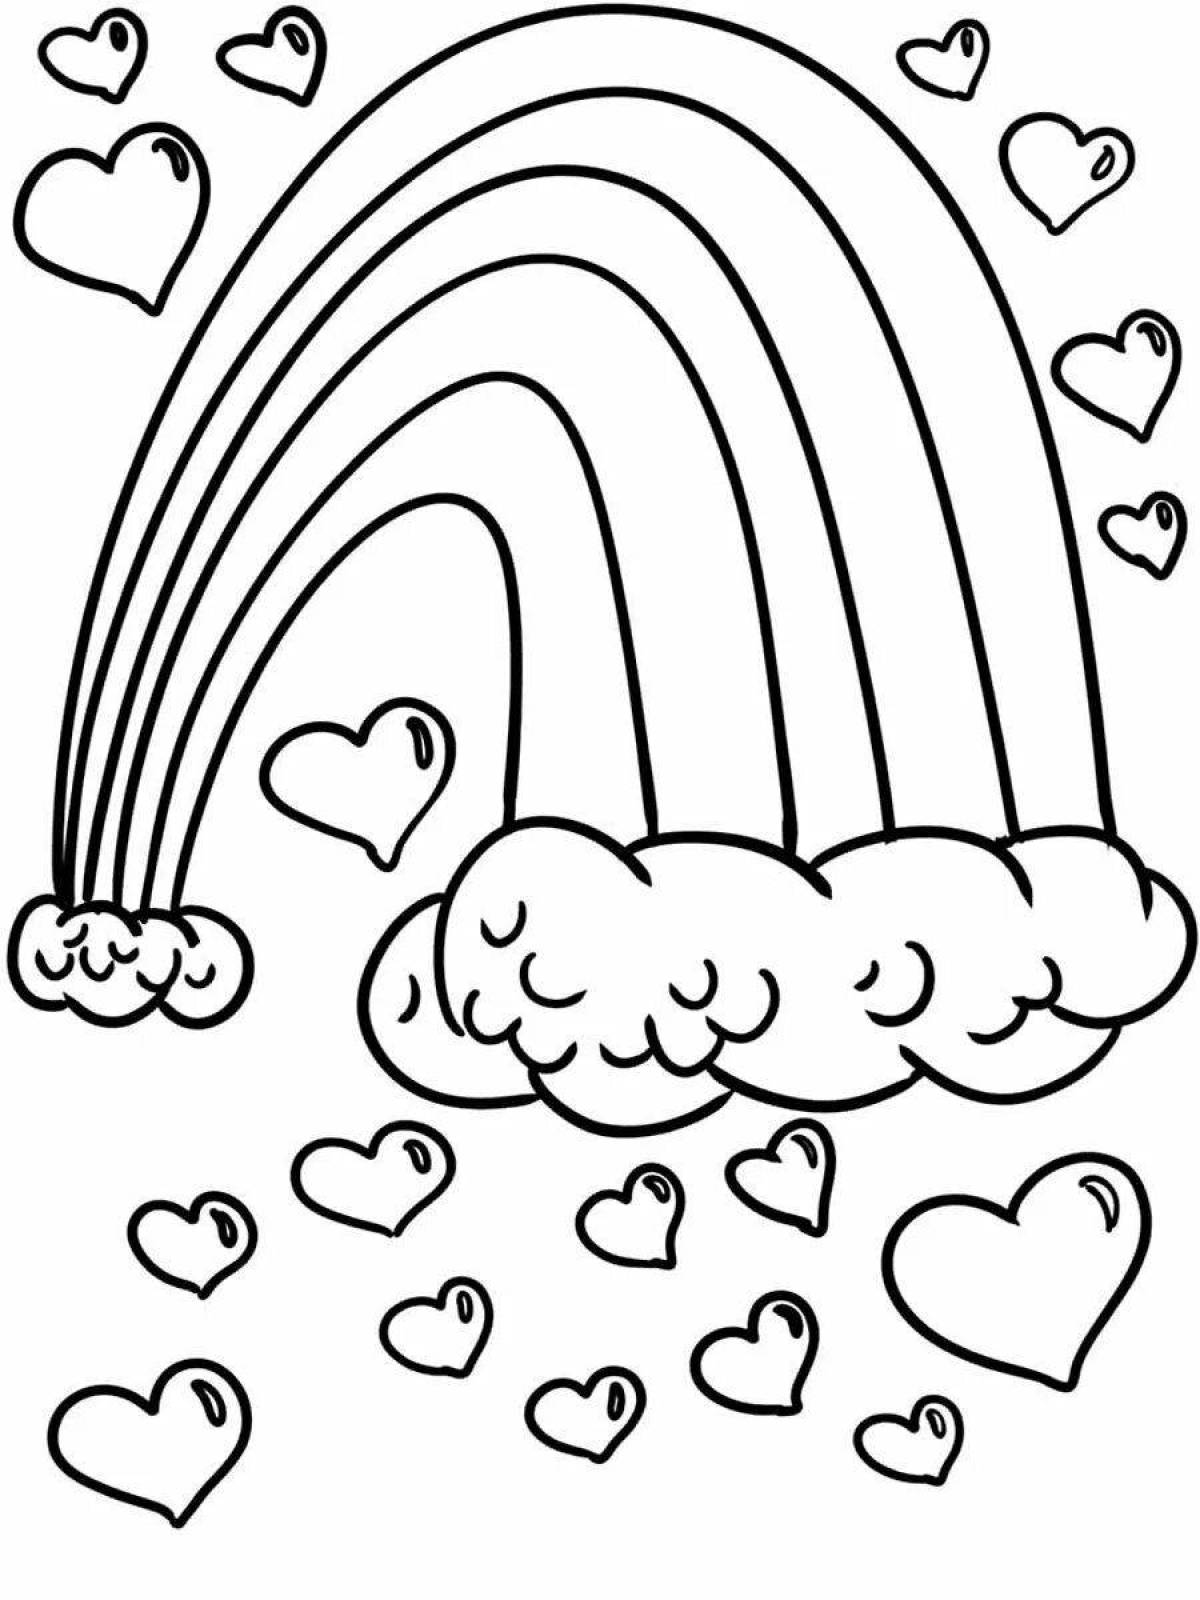 Shining rainbow coloring page